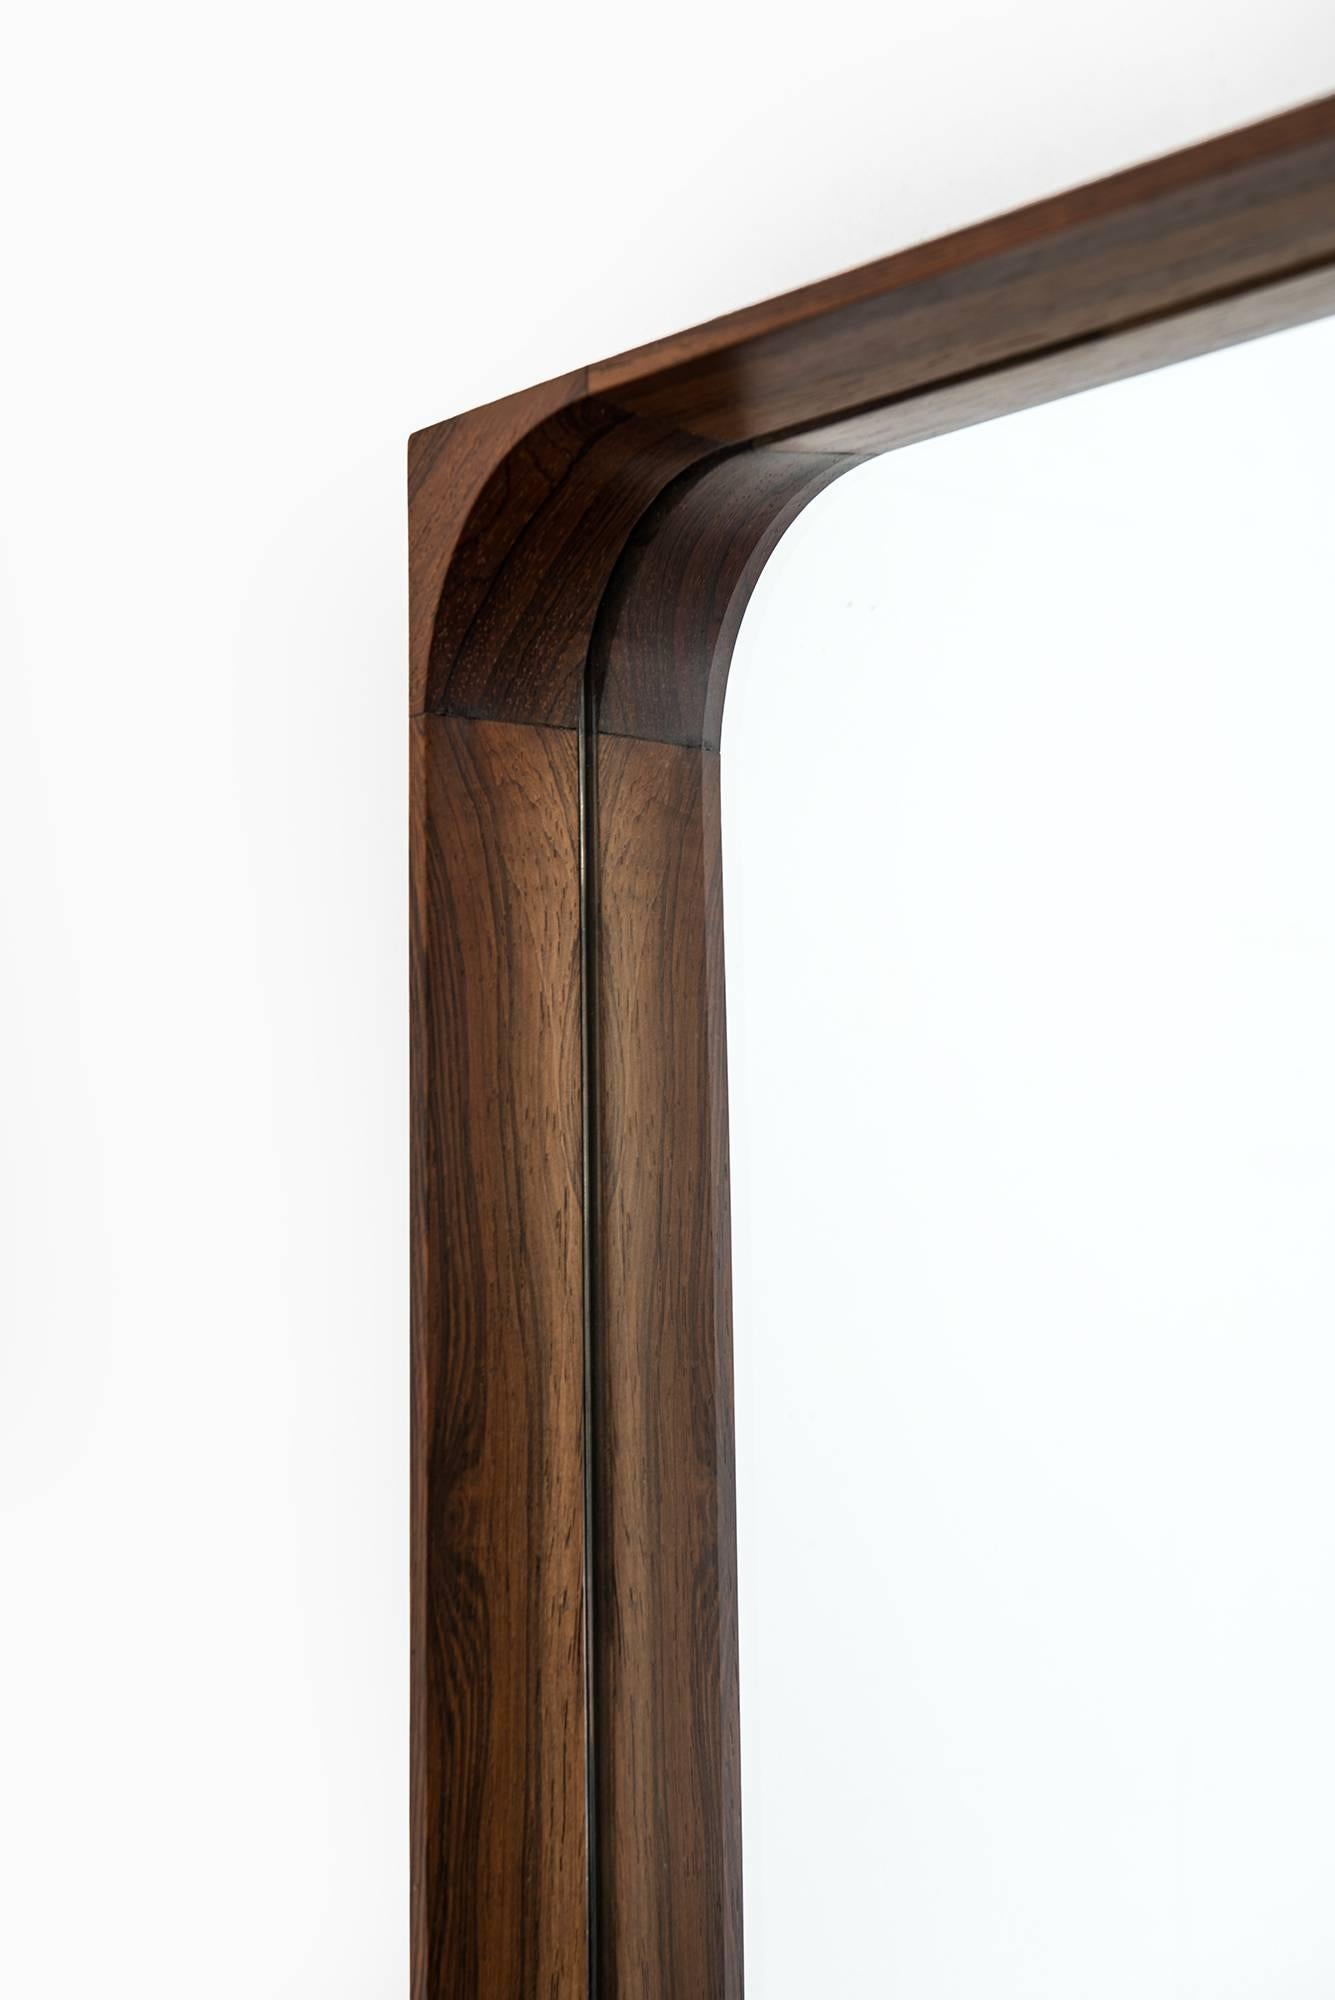 Rosewood mirror produced in Denmark